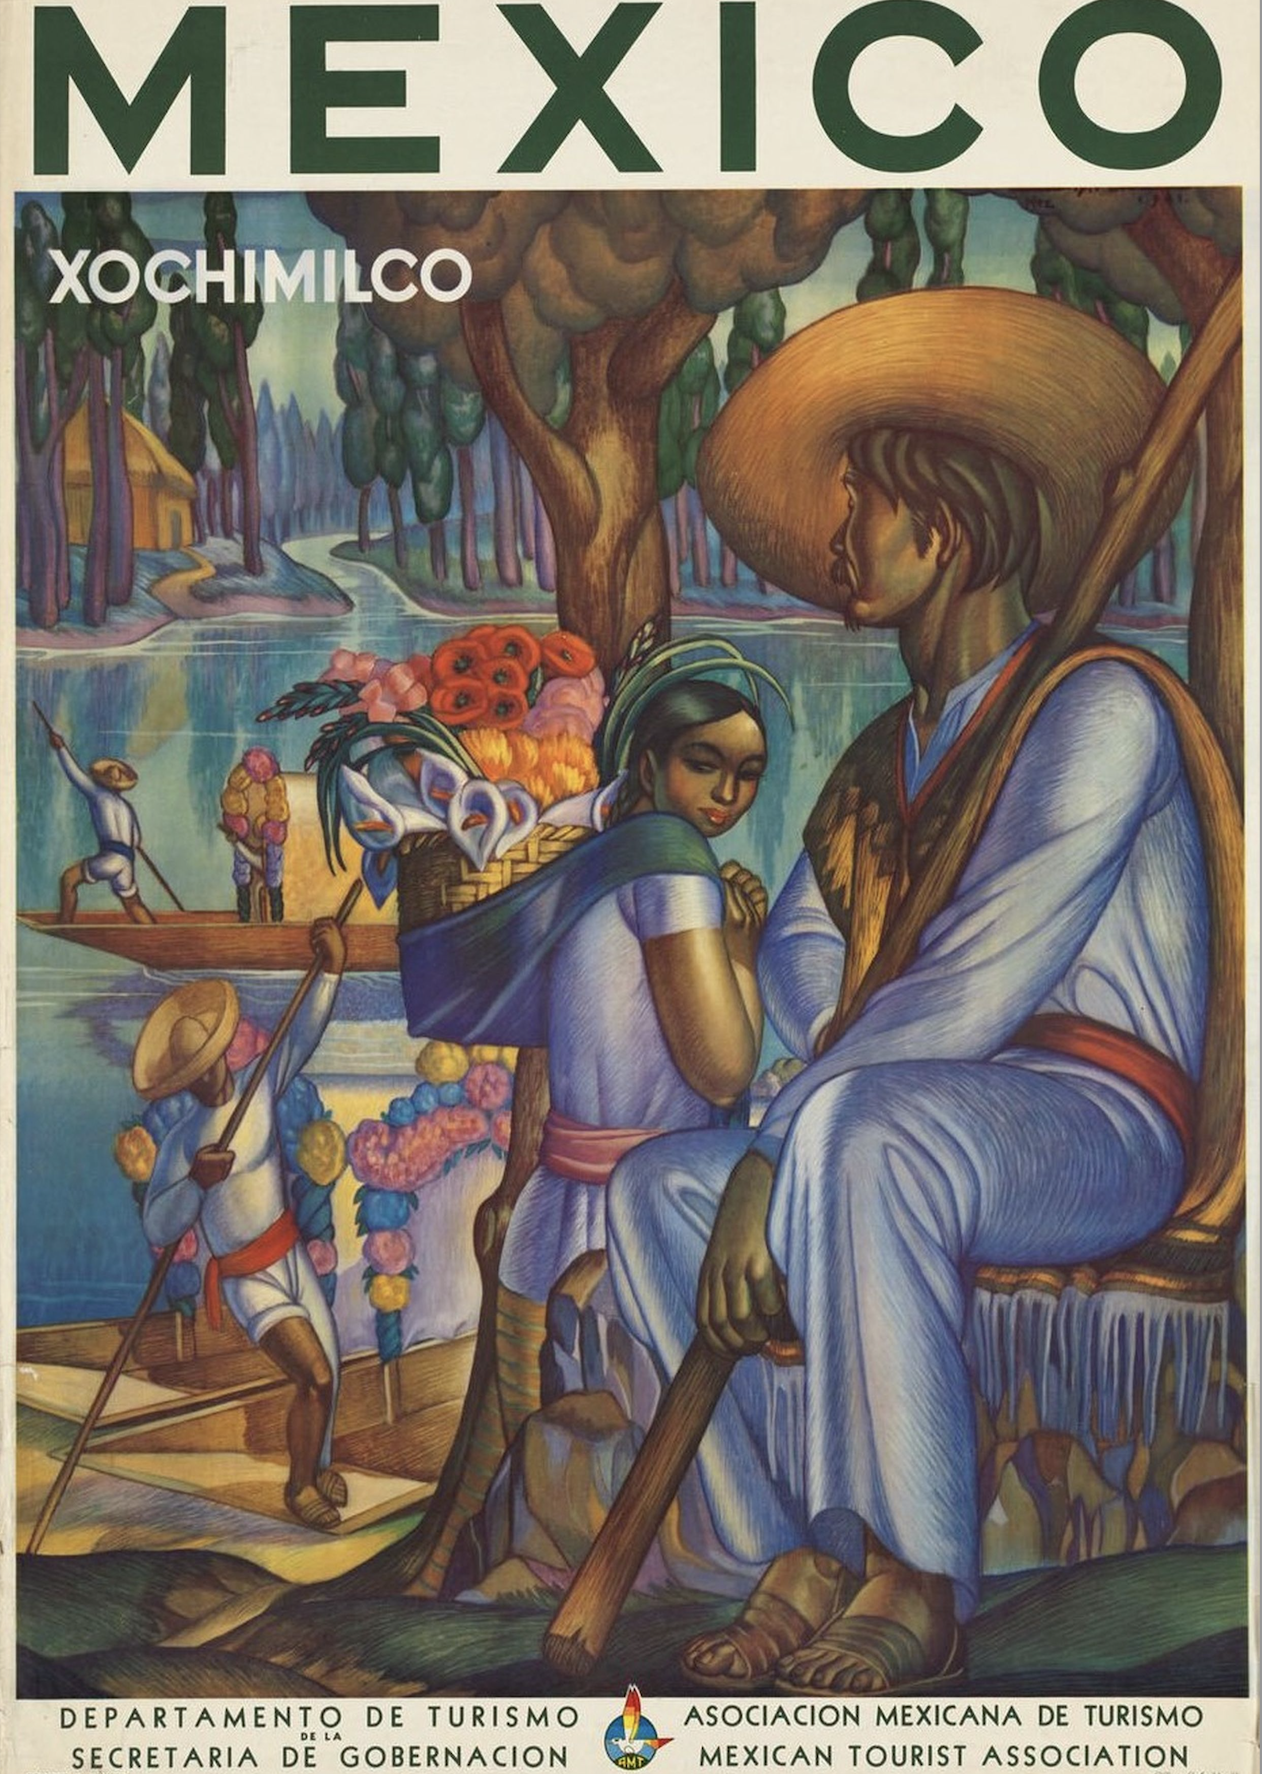 Mexico Travel Poster - Image 2 of 2